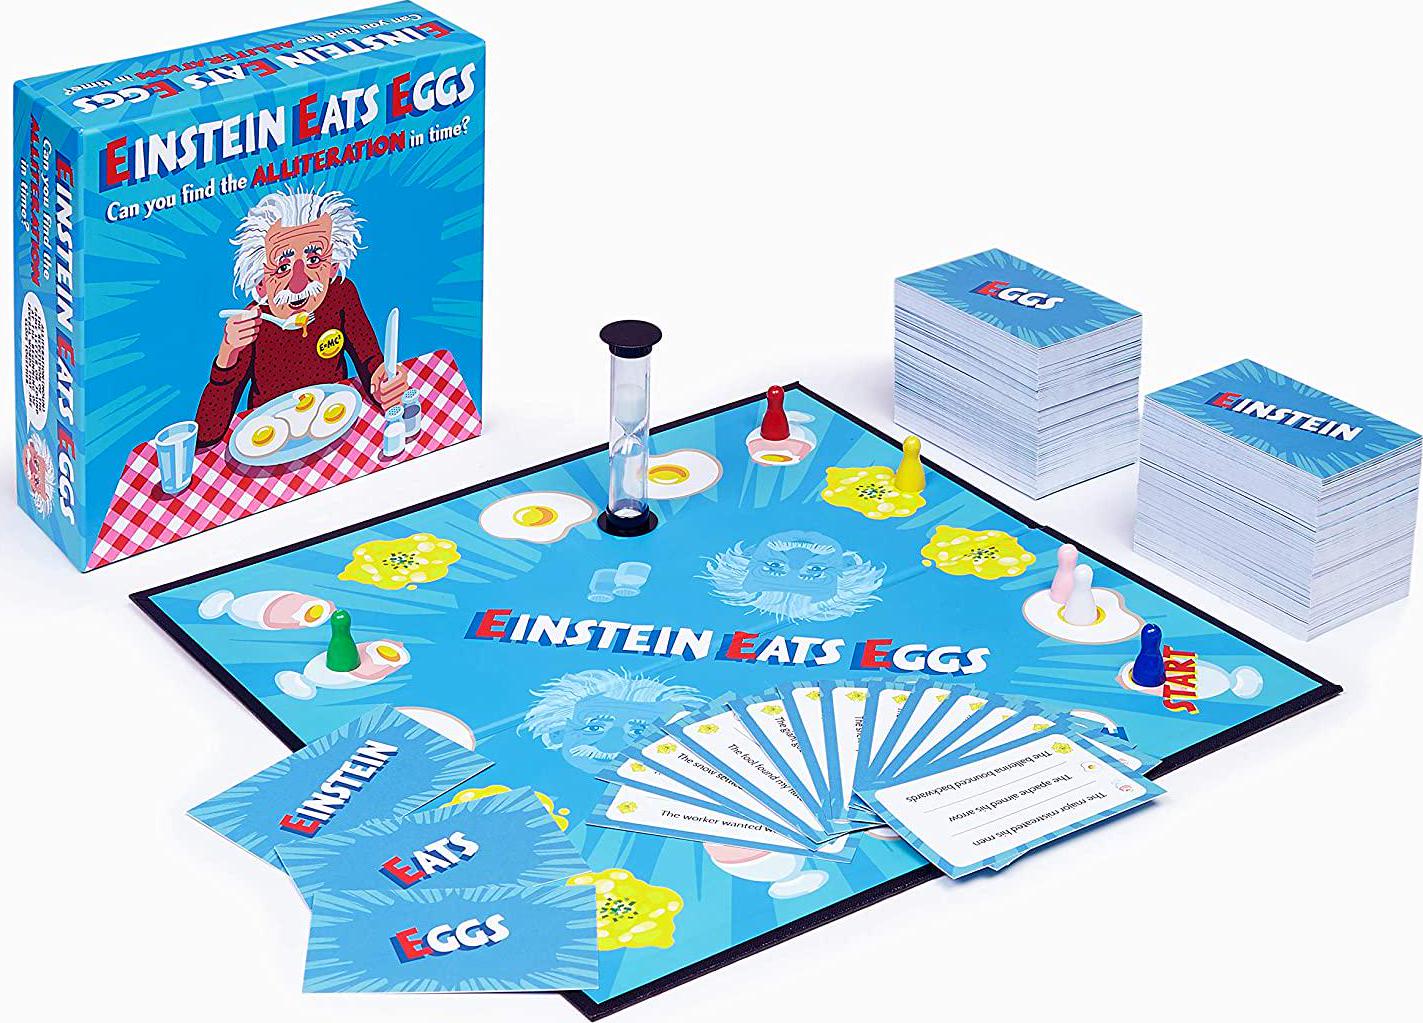 Clarendon Games, Einstein Eats Eggs: The Hilarious Fast-Talking Charades Game of Quick Minds and Mouths that Gets the Whole Family Laughing Party Games for Adults, Teens, Kids.